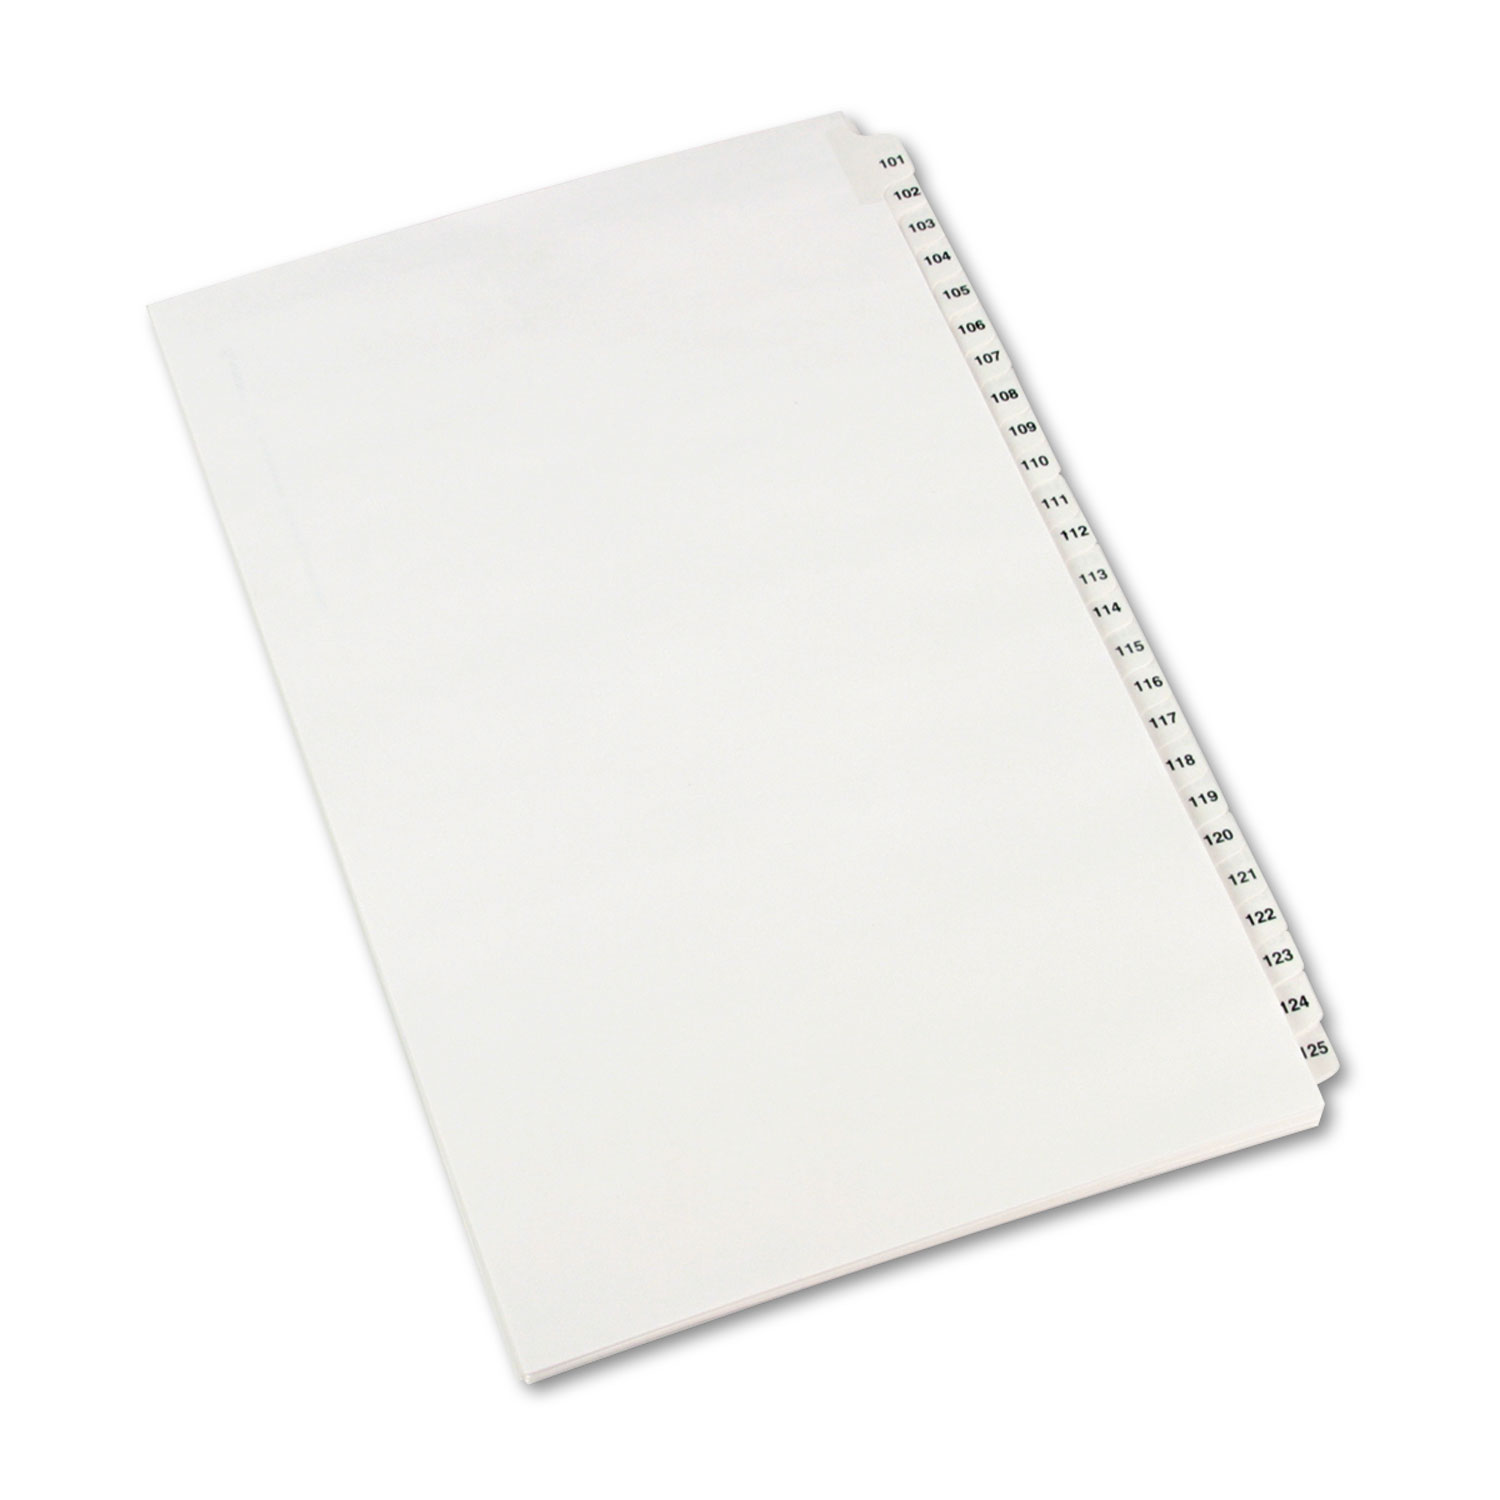  Avery 01434 Preprinted Legal Exhibit Side Tab Index Dividers, Avery Style, 25-Tab, 101 to 125, 14 x 8.5, White, 1 Set (AVE01434) 